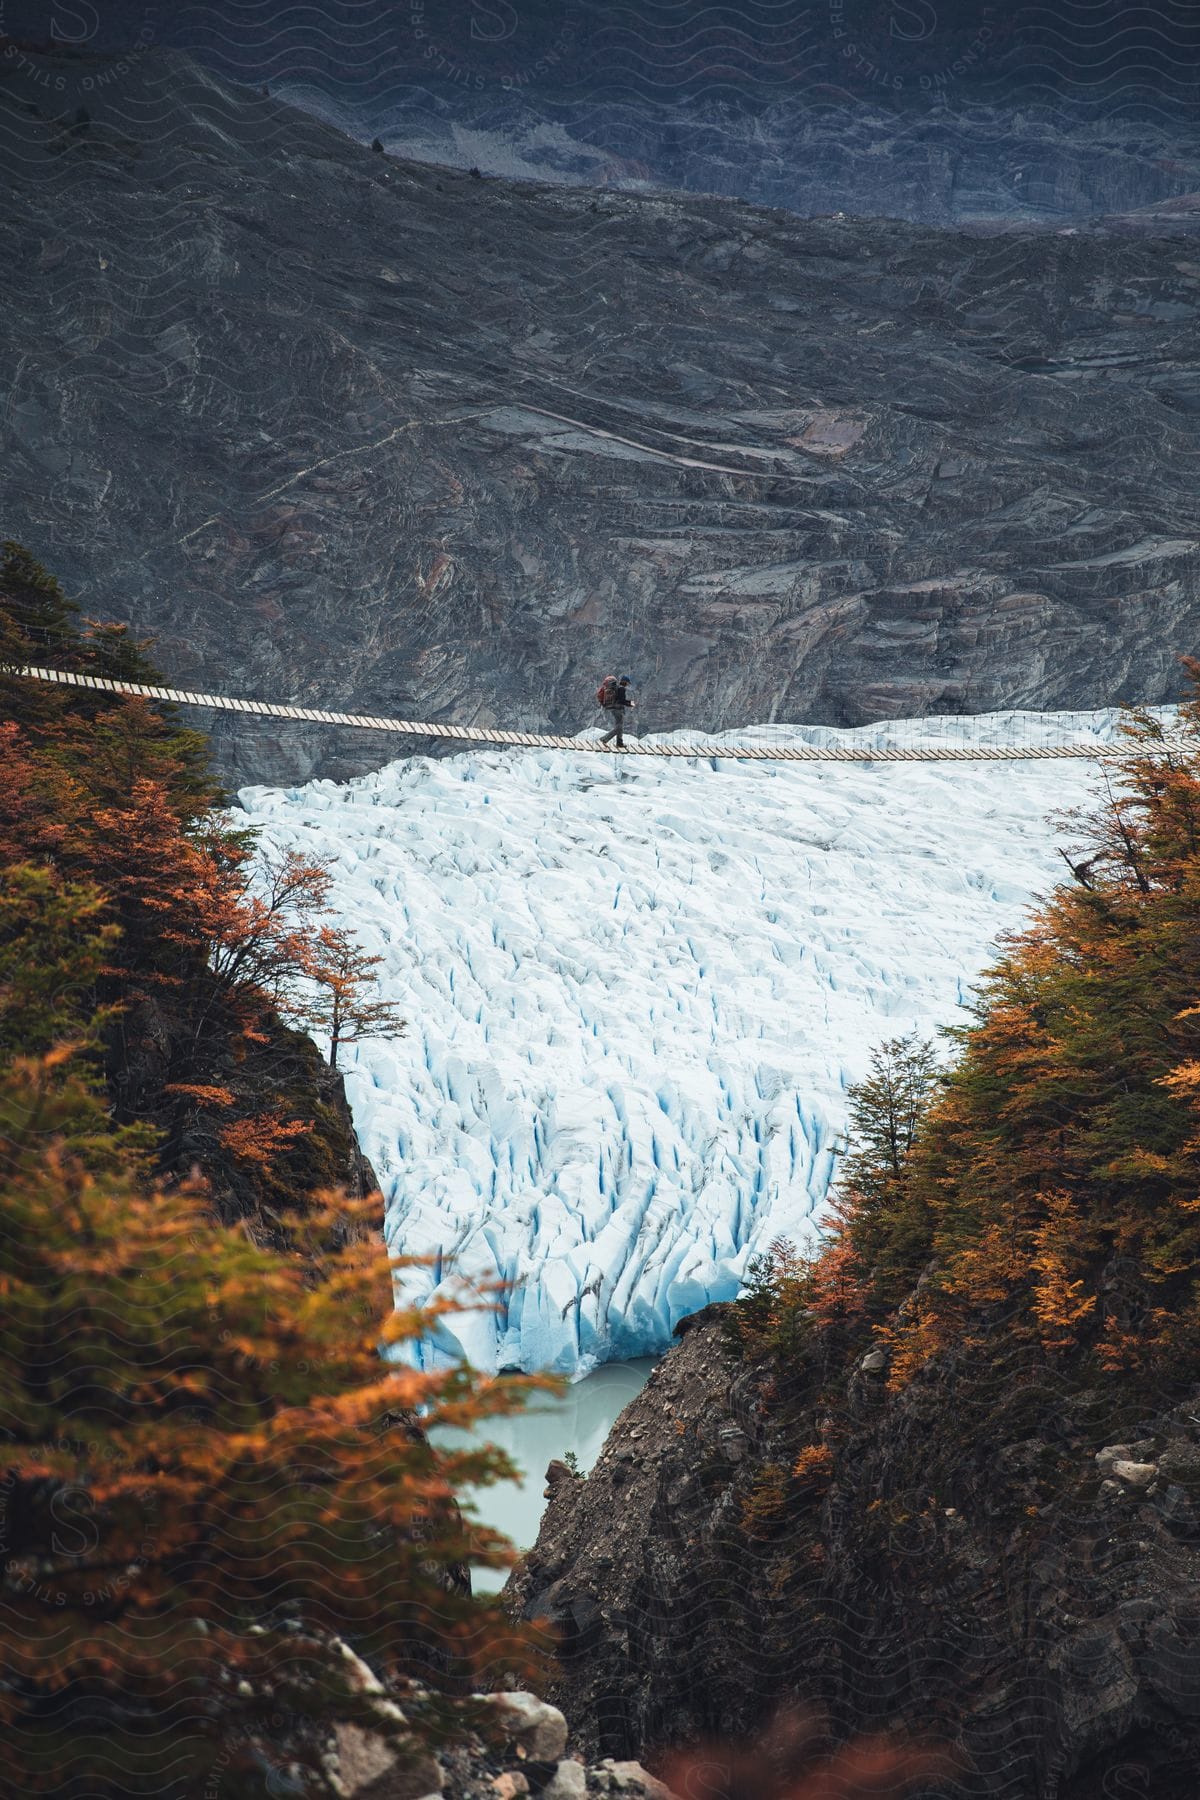 A person crossing a bridge in a mountainous wilderness